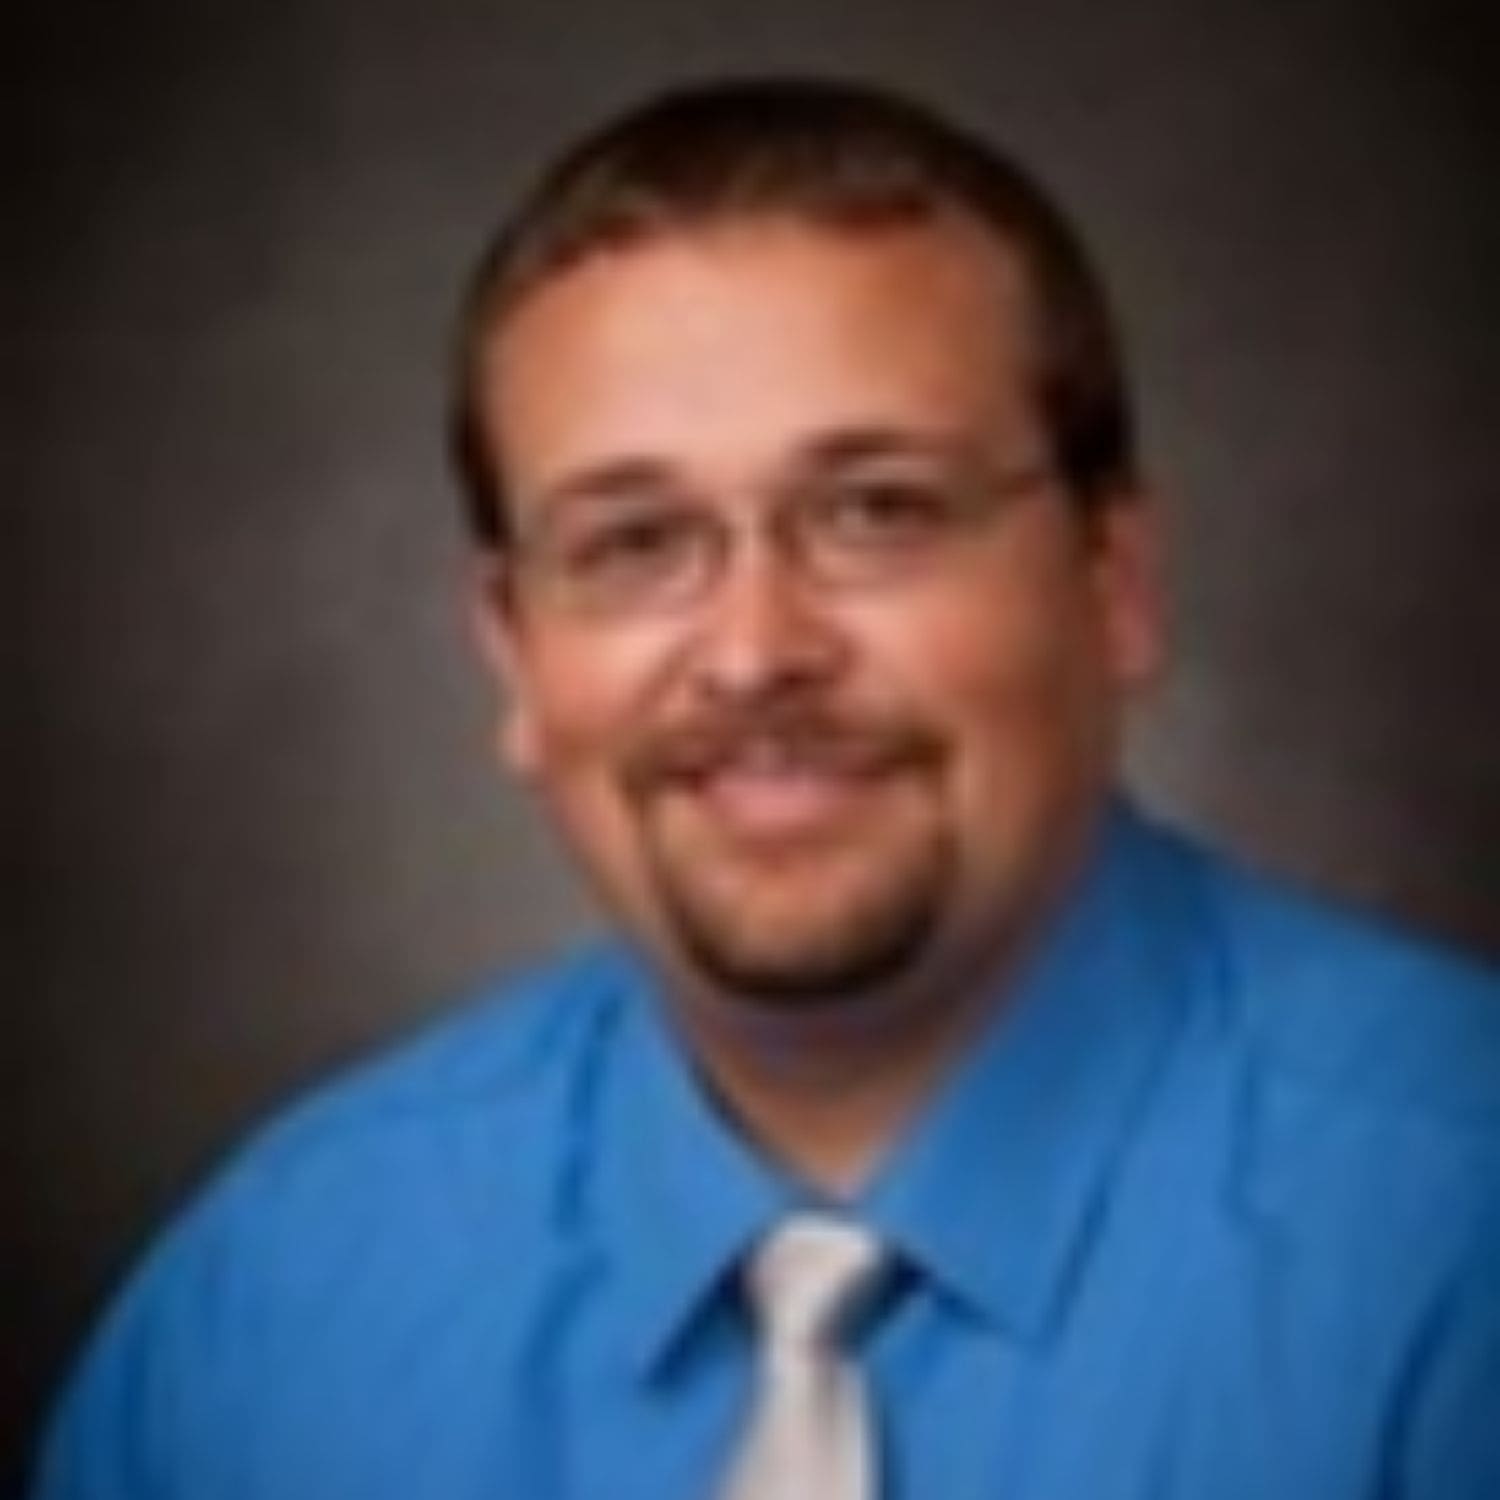 Michael Gengler, Iowa Lakes Community College's Sustainable Energy Resources & Technologies Program Lead Faculty Member